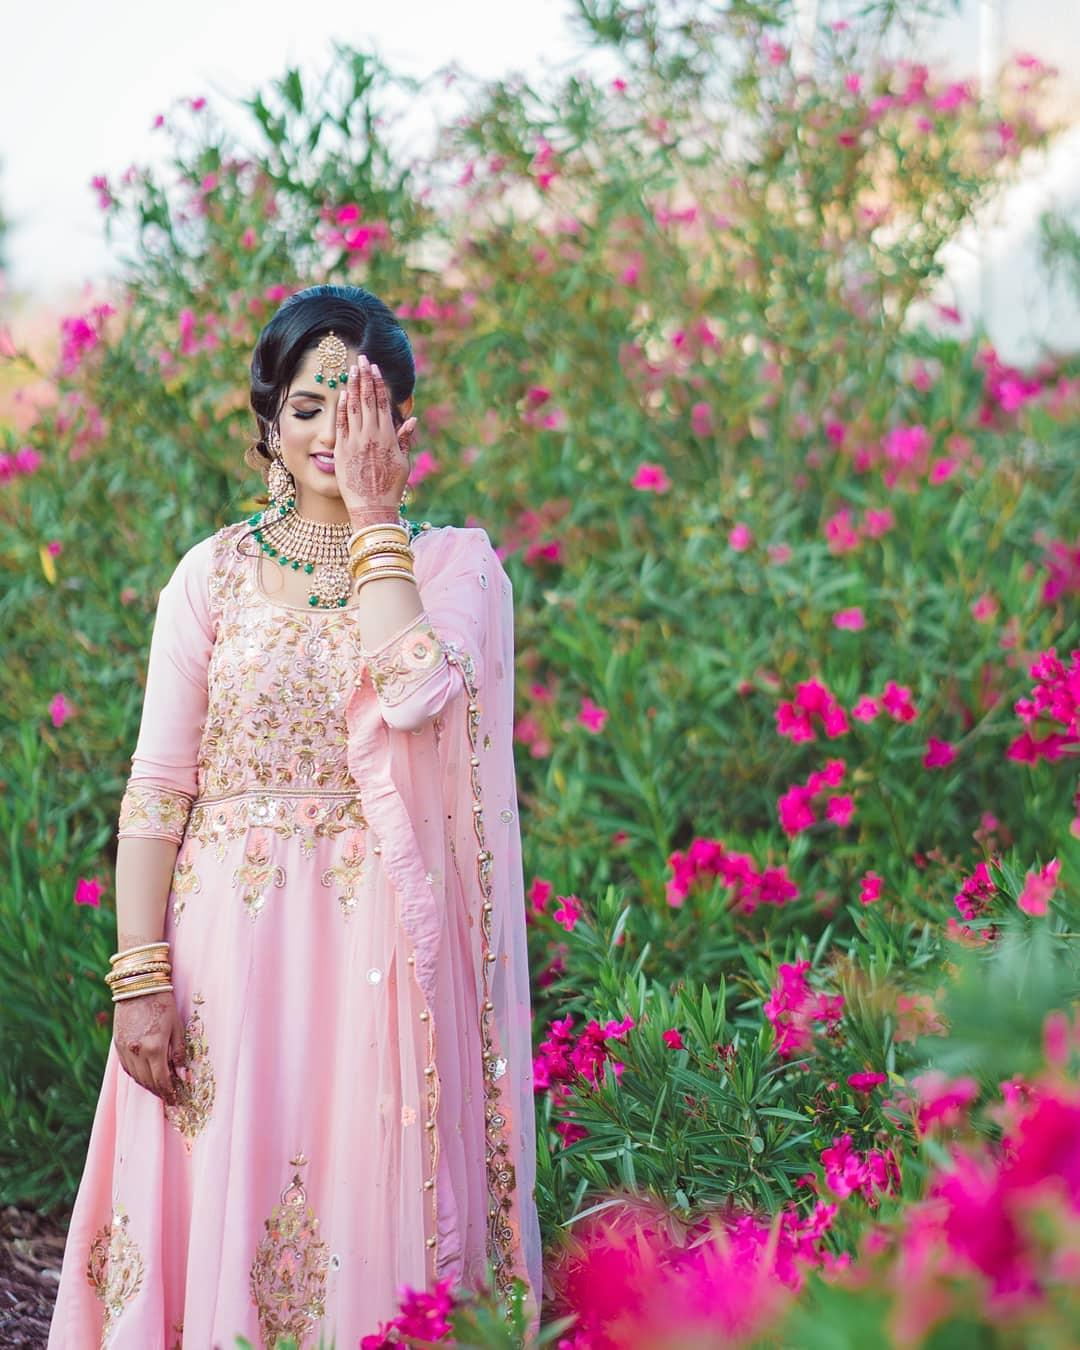 Punjabi Dress Patterns That Will Ensure All Eyes Are on You